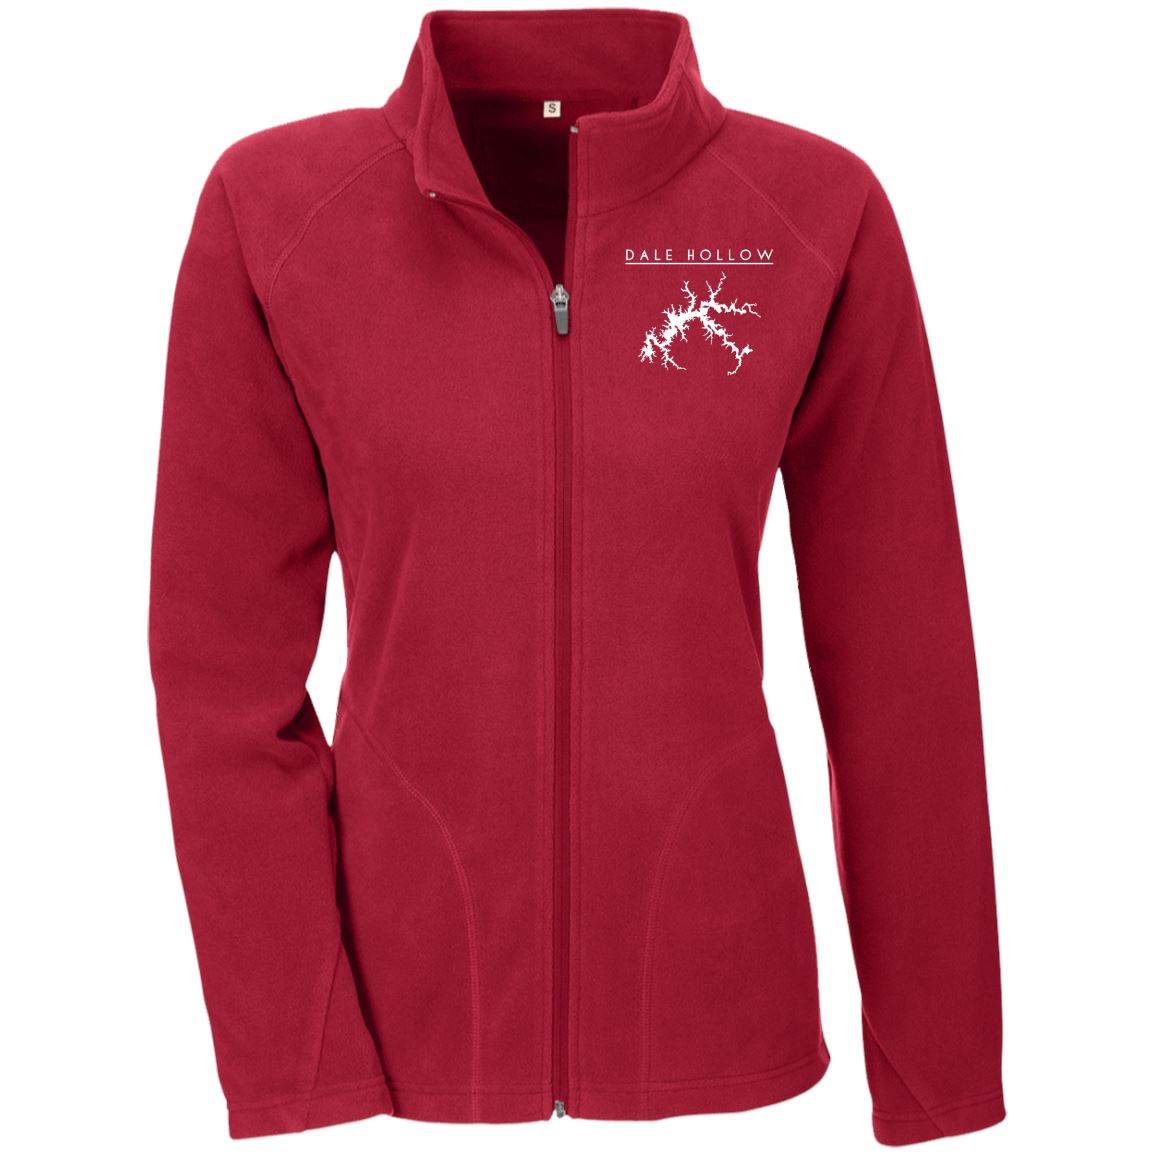 Dale Hollow Embroidered Women's Microfleece - Houseboat Kings